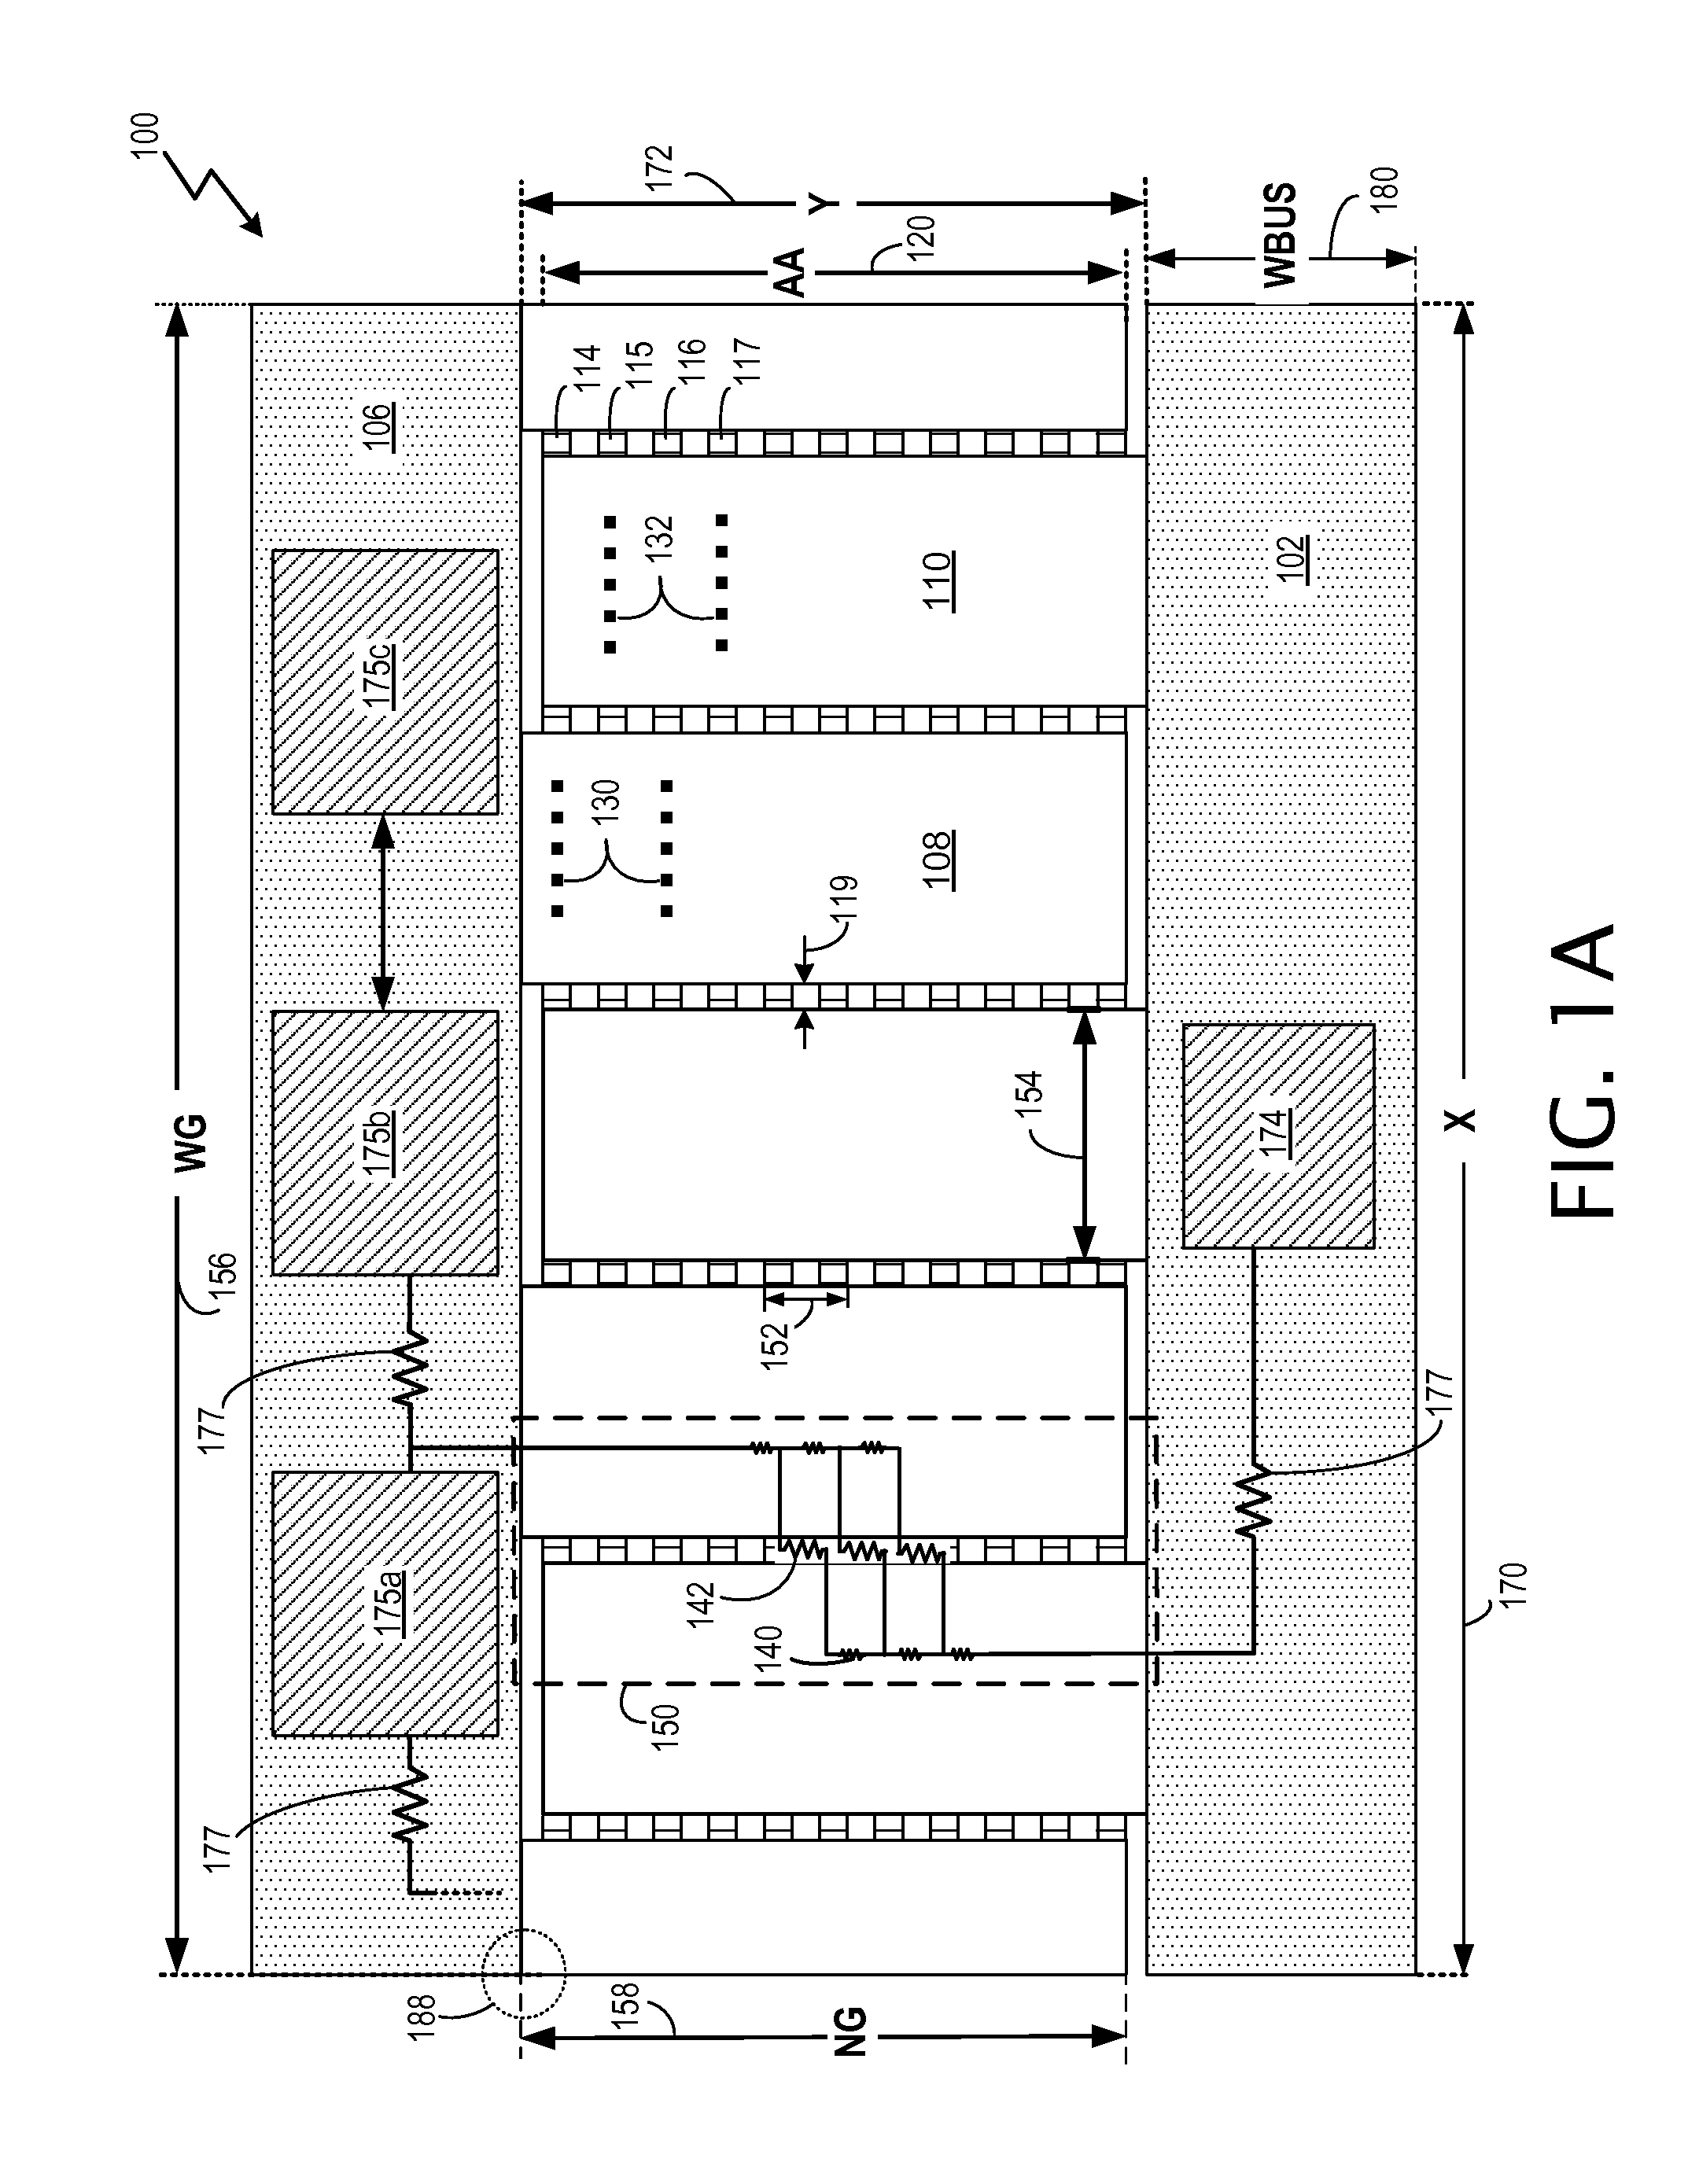 Apparatus and method for optimized power cell synthesizer